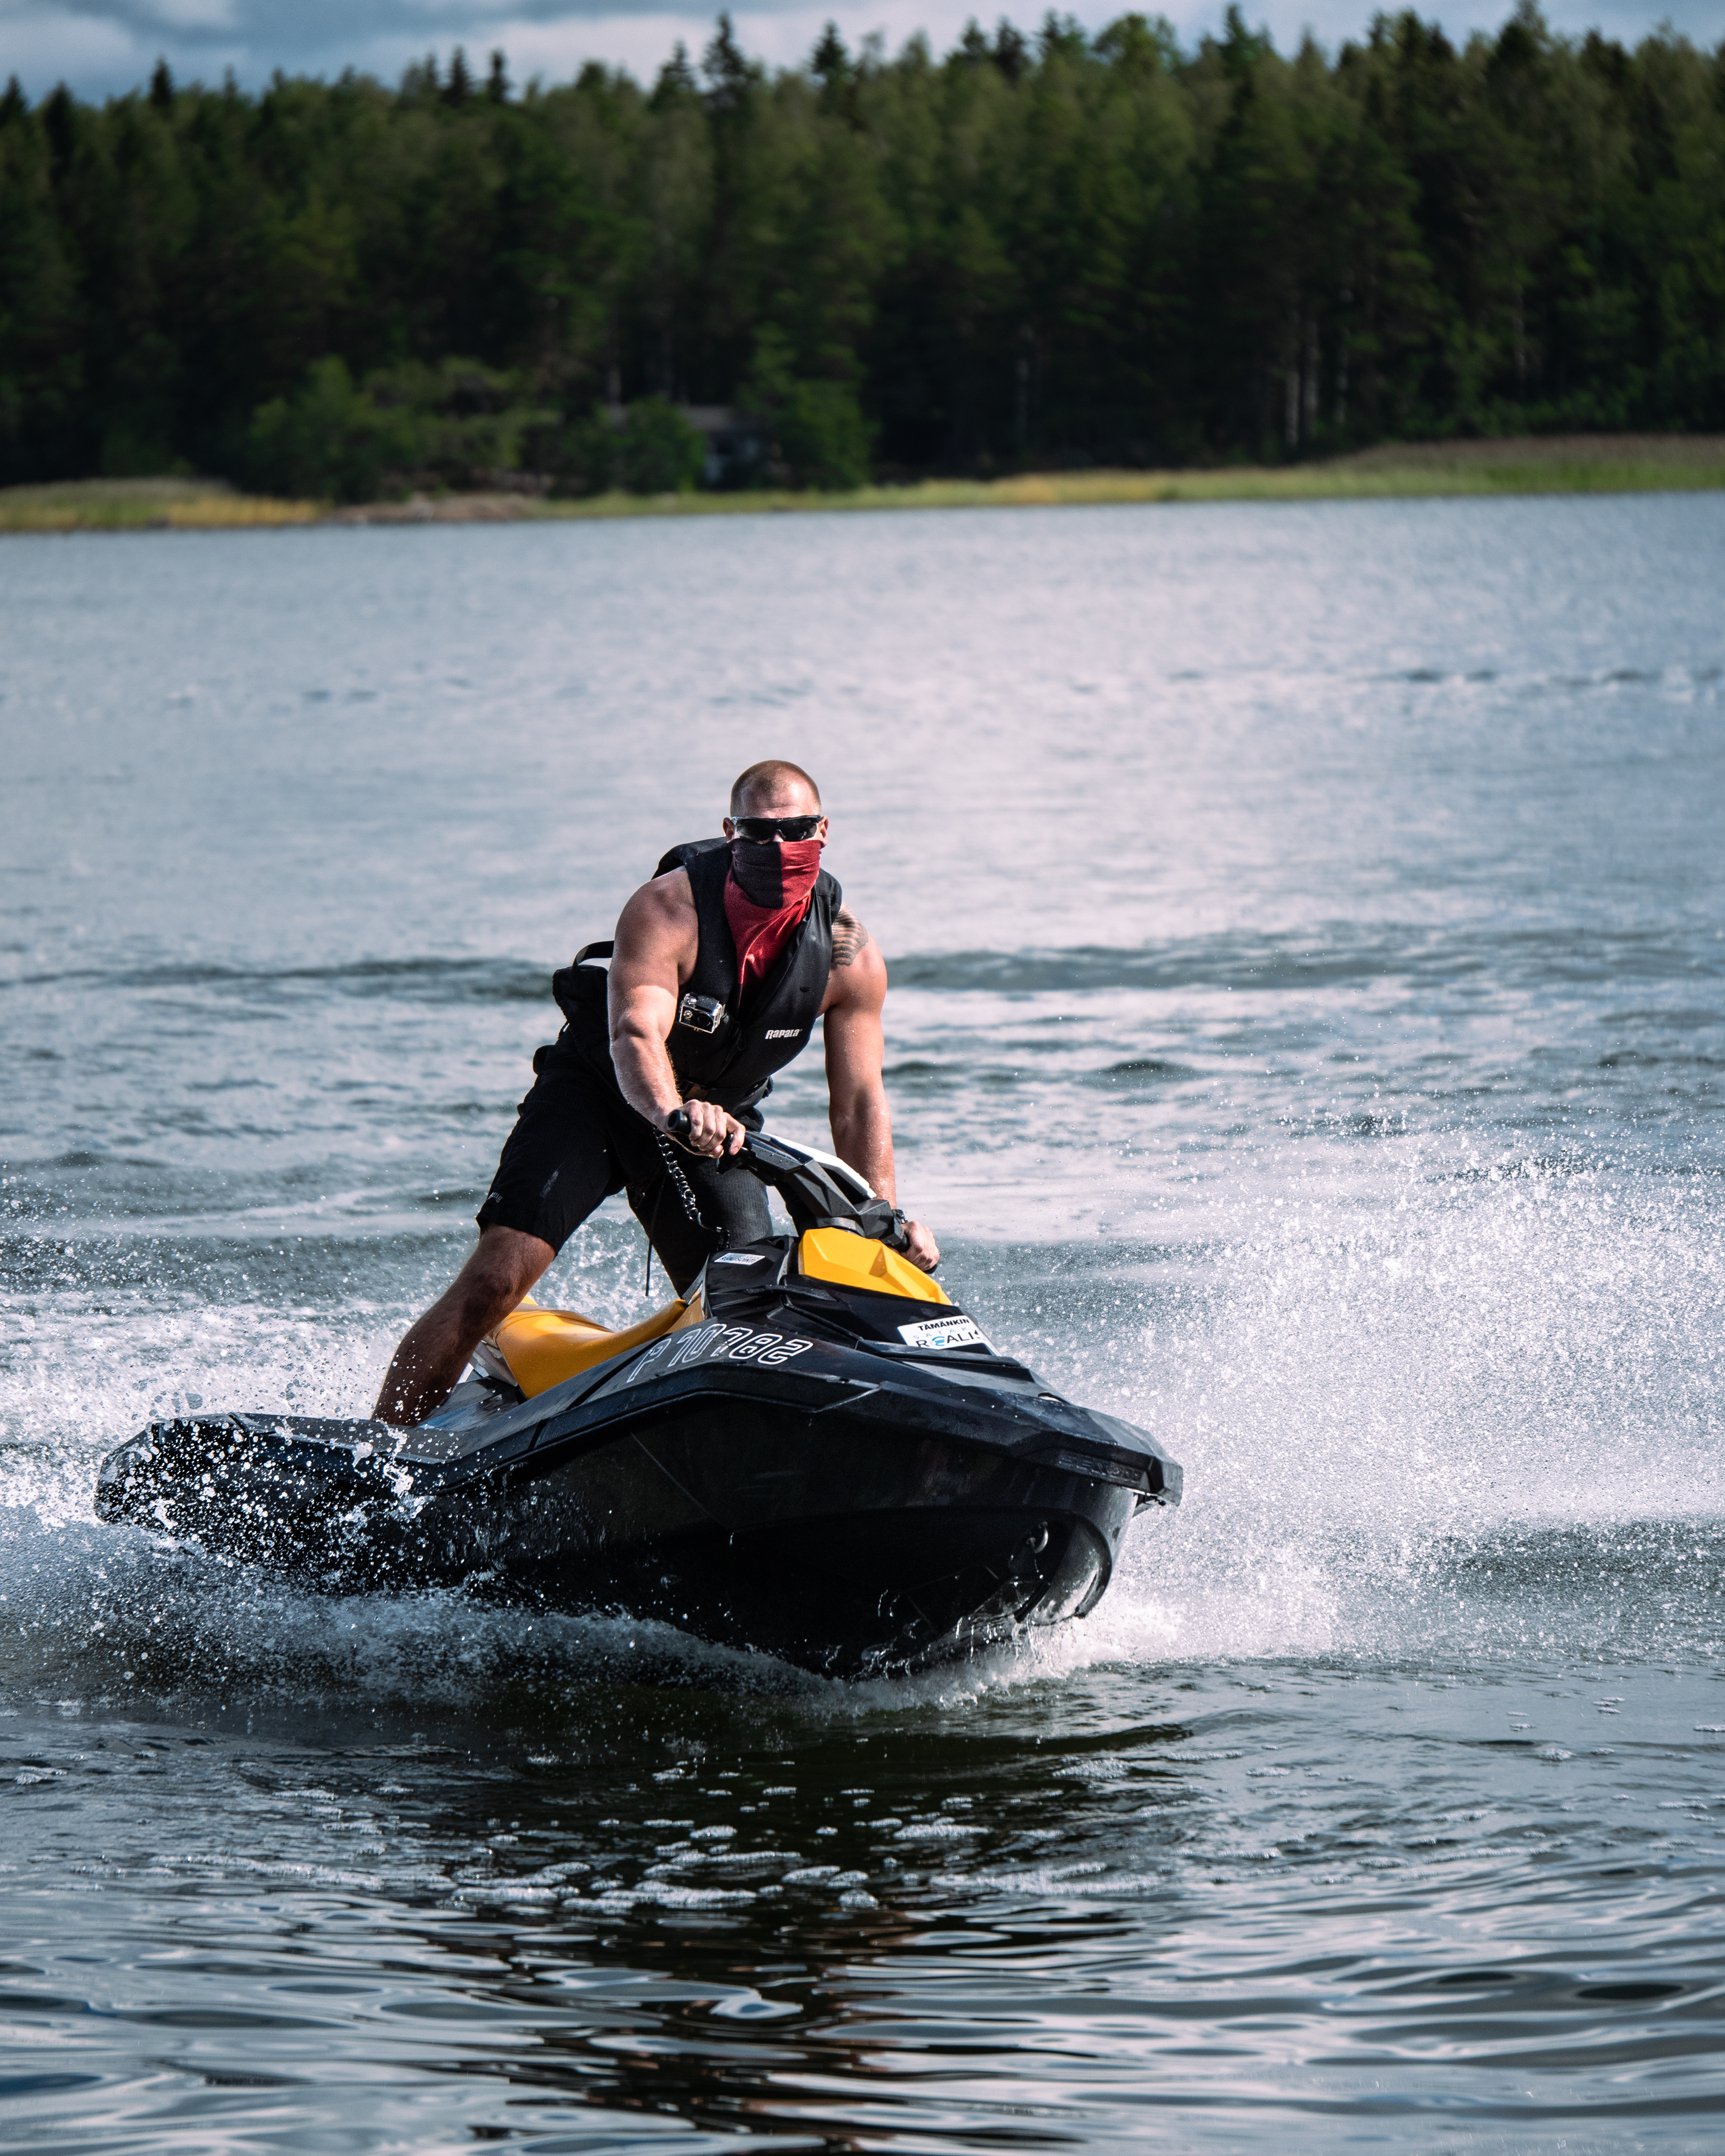 Muscular man riding a jet ski. Wearing a red bandana, sunglasses, a life west and shorts. He is in a lake.